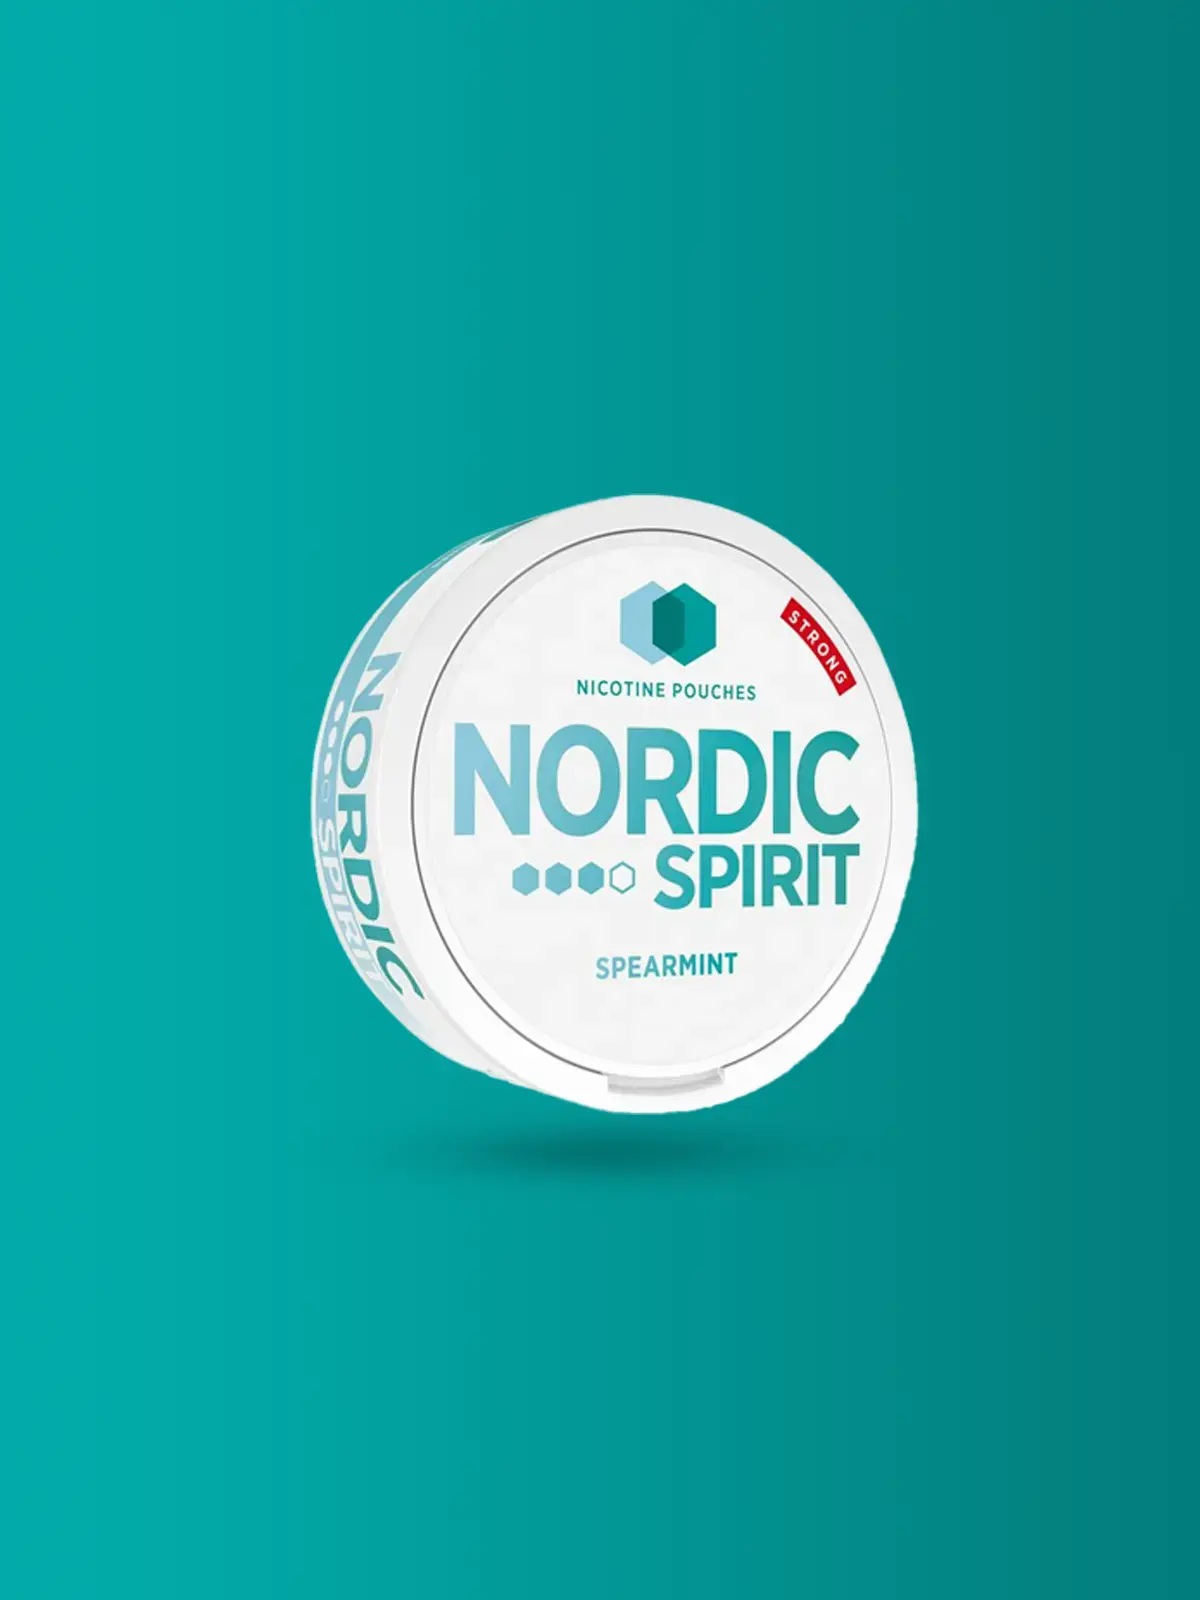 A container of Nordic Spirit nicotine pouches in Spearmint flavour in front of a teal colored background